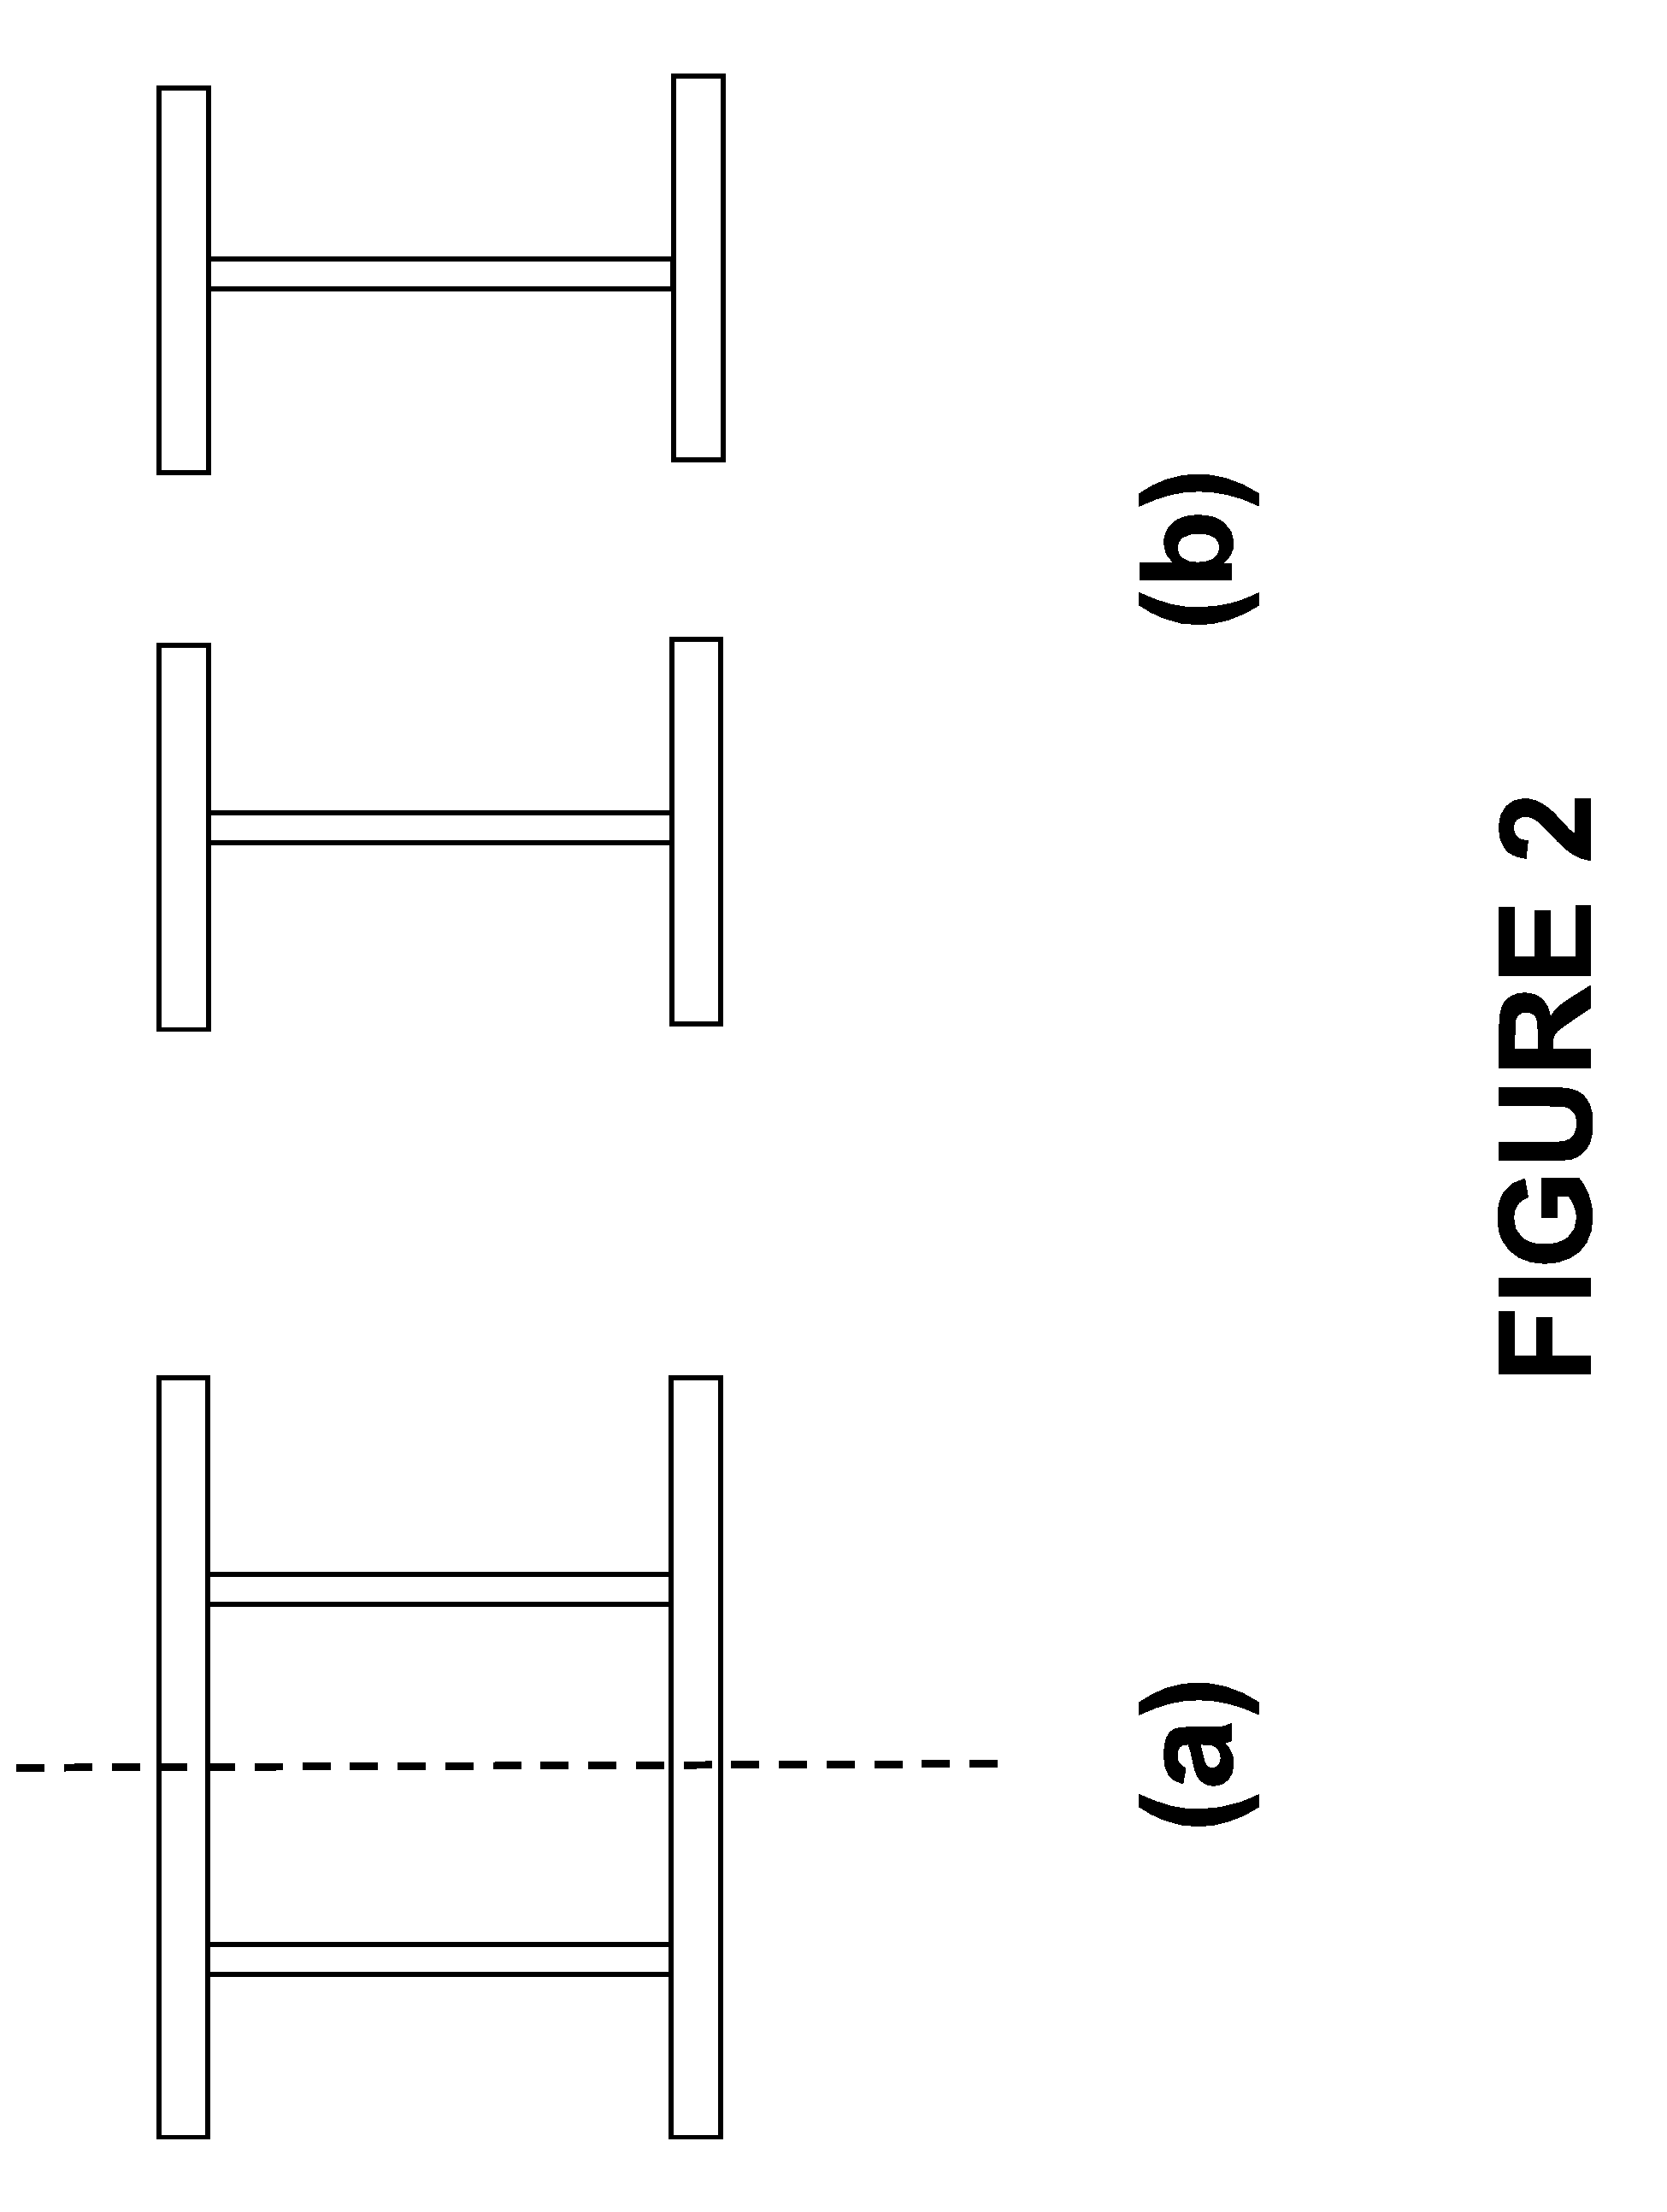 Method and System for Wafer Inspection